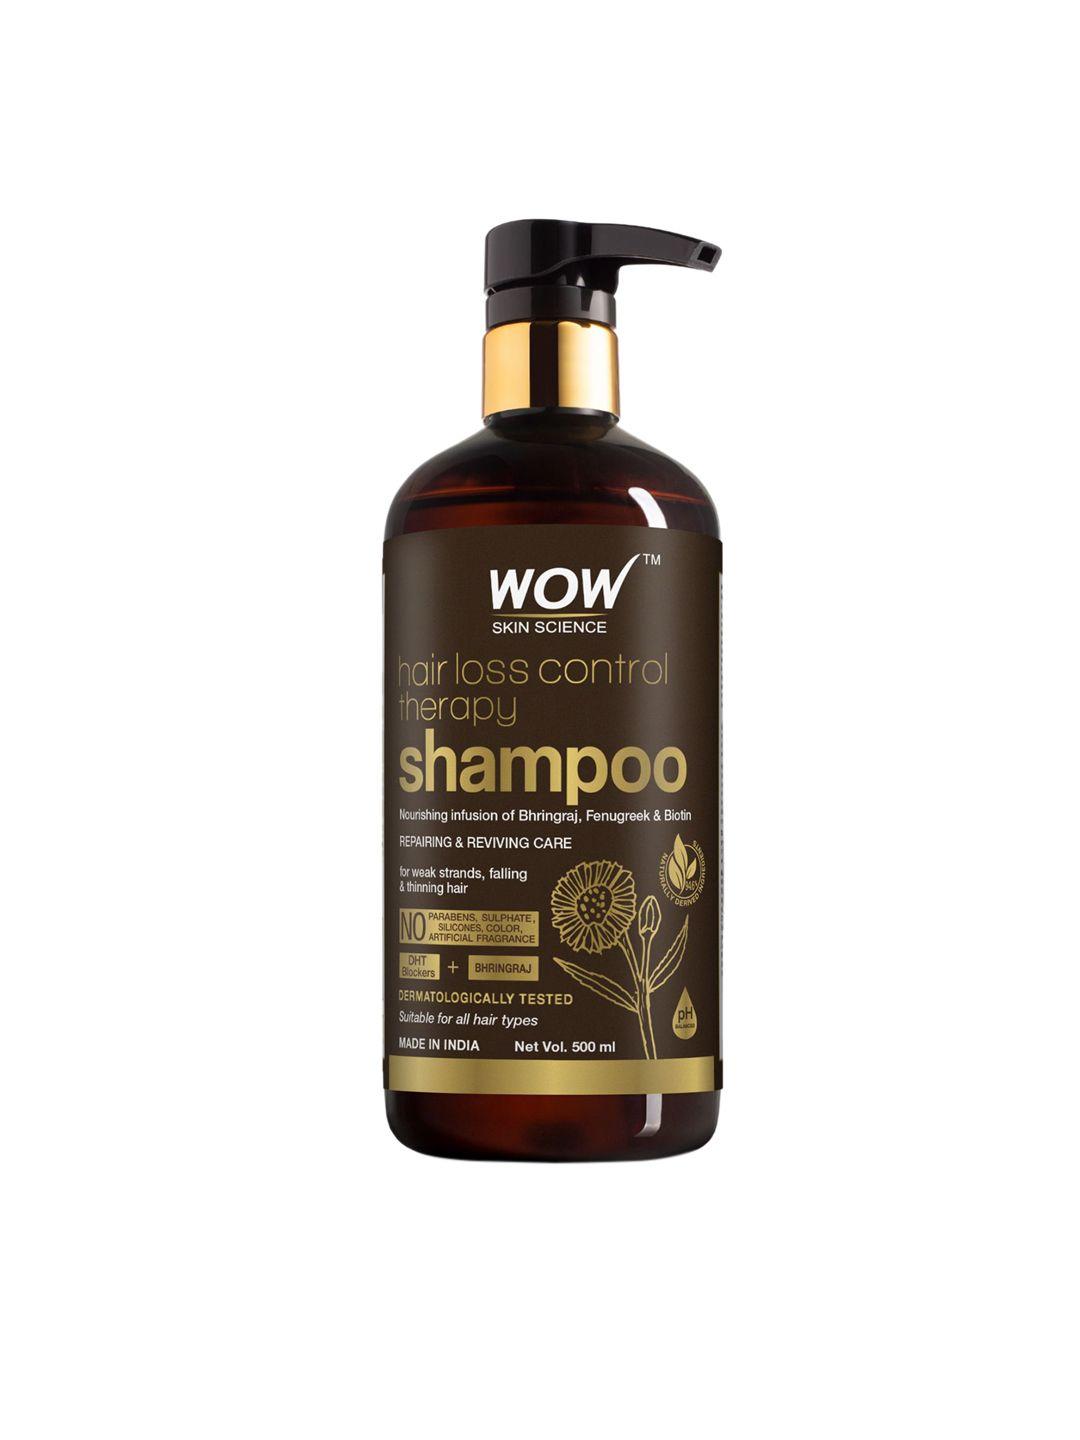 wow skin science hair loss control therapy shampoo - 500 ml